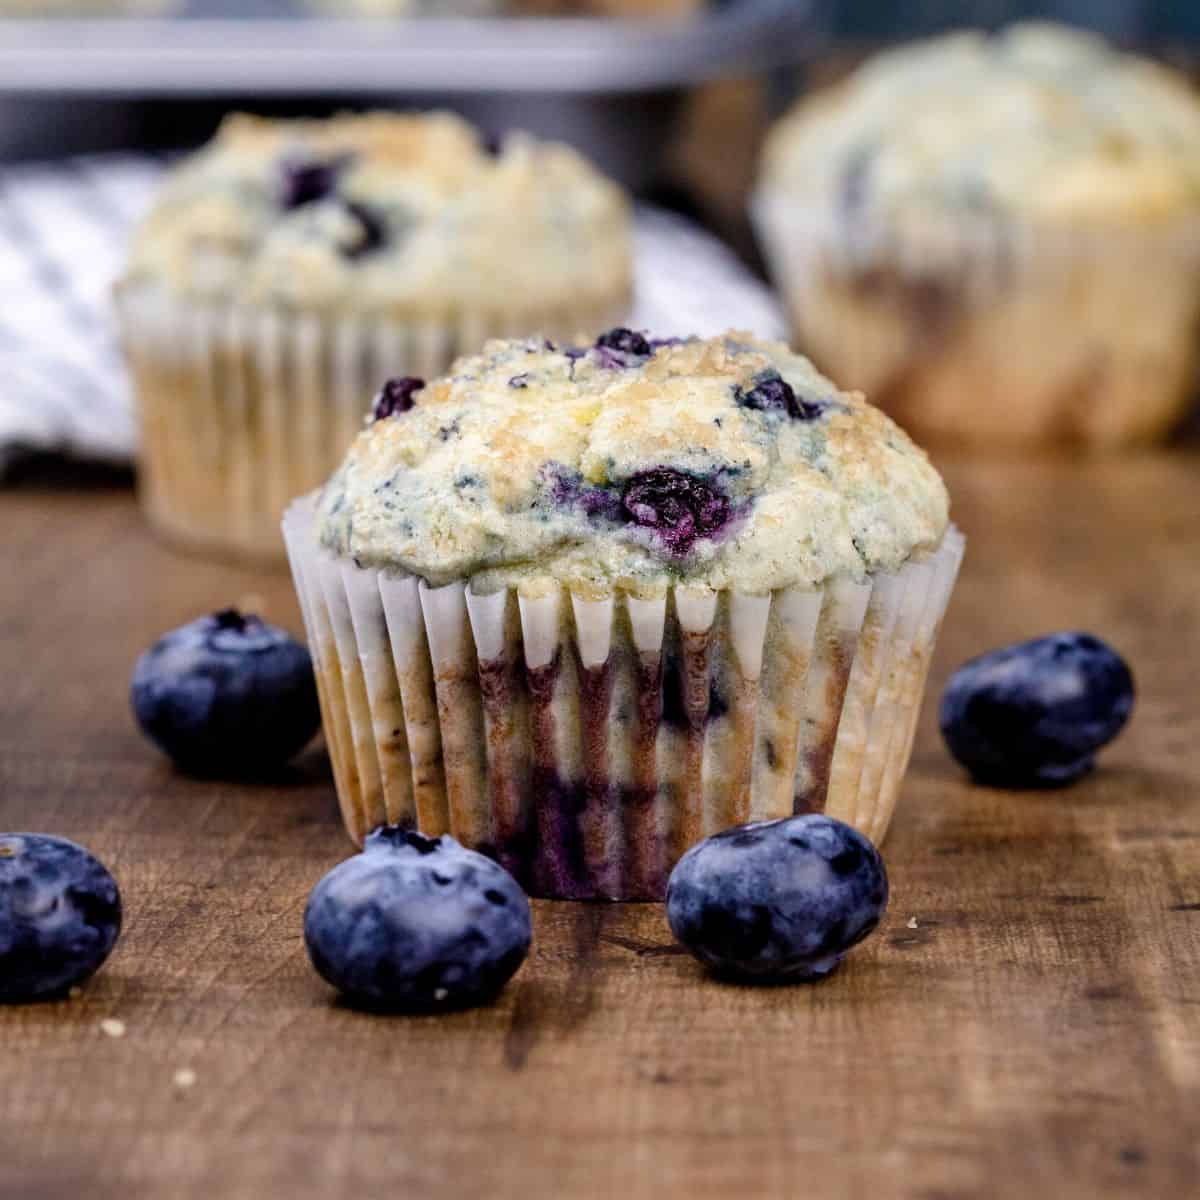 A gluten free blueberry muffin in a white muffin wrapper is next to fresh blueberries on a wood table. More muffins are blurred in the background.